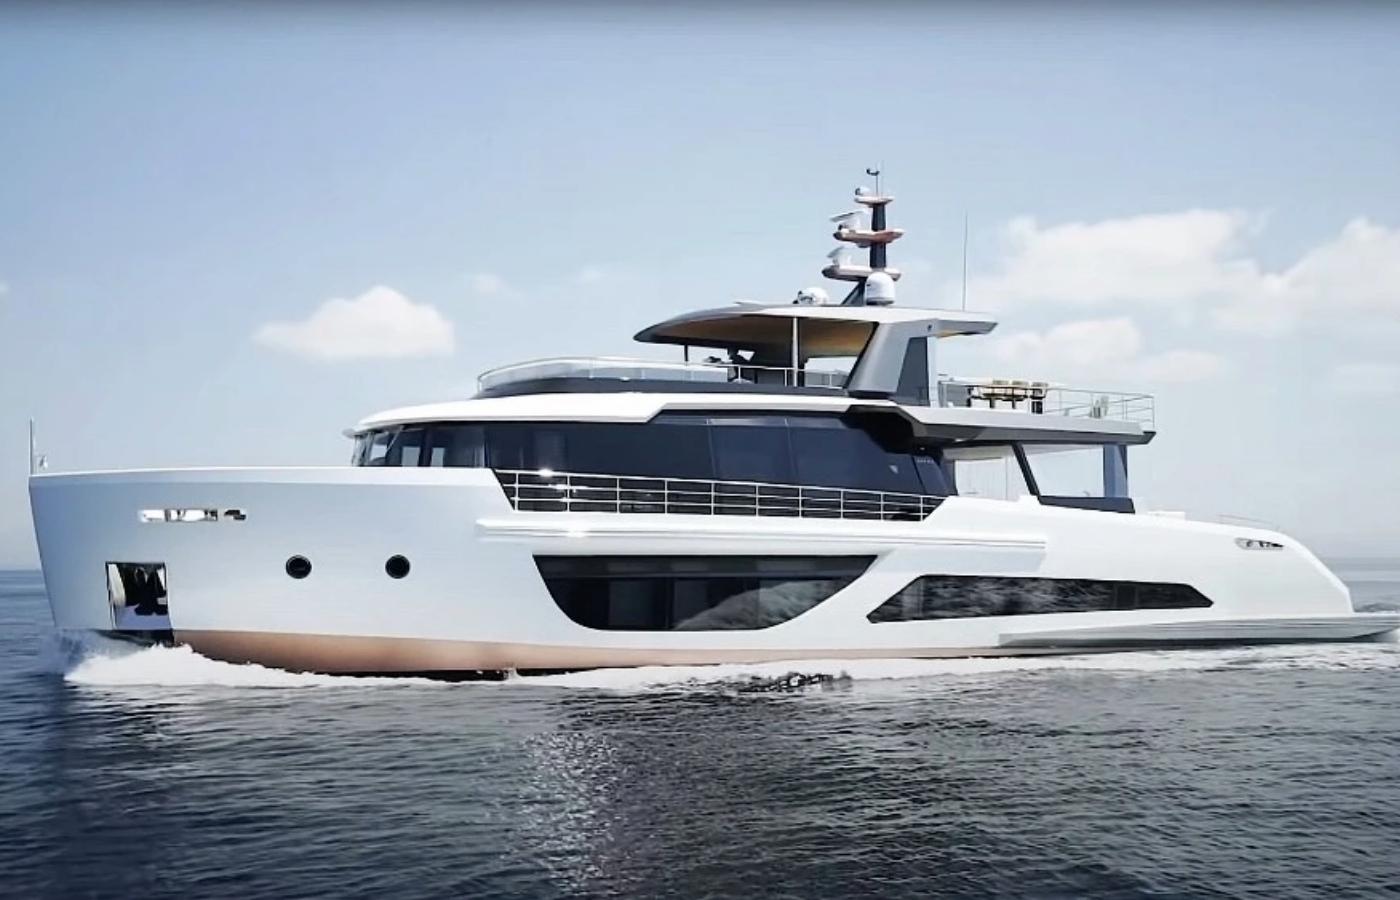 Boat of the Week: Meet 'Vivace,' a 102-Foot Superyacht Perfect for Cruising the Bahamas [In the News]